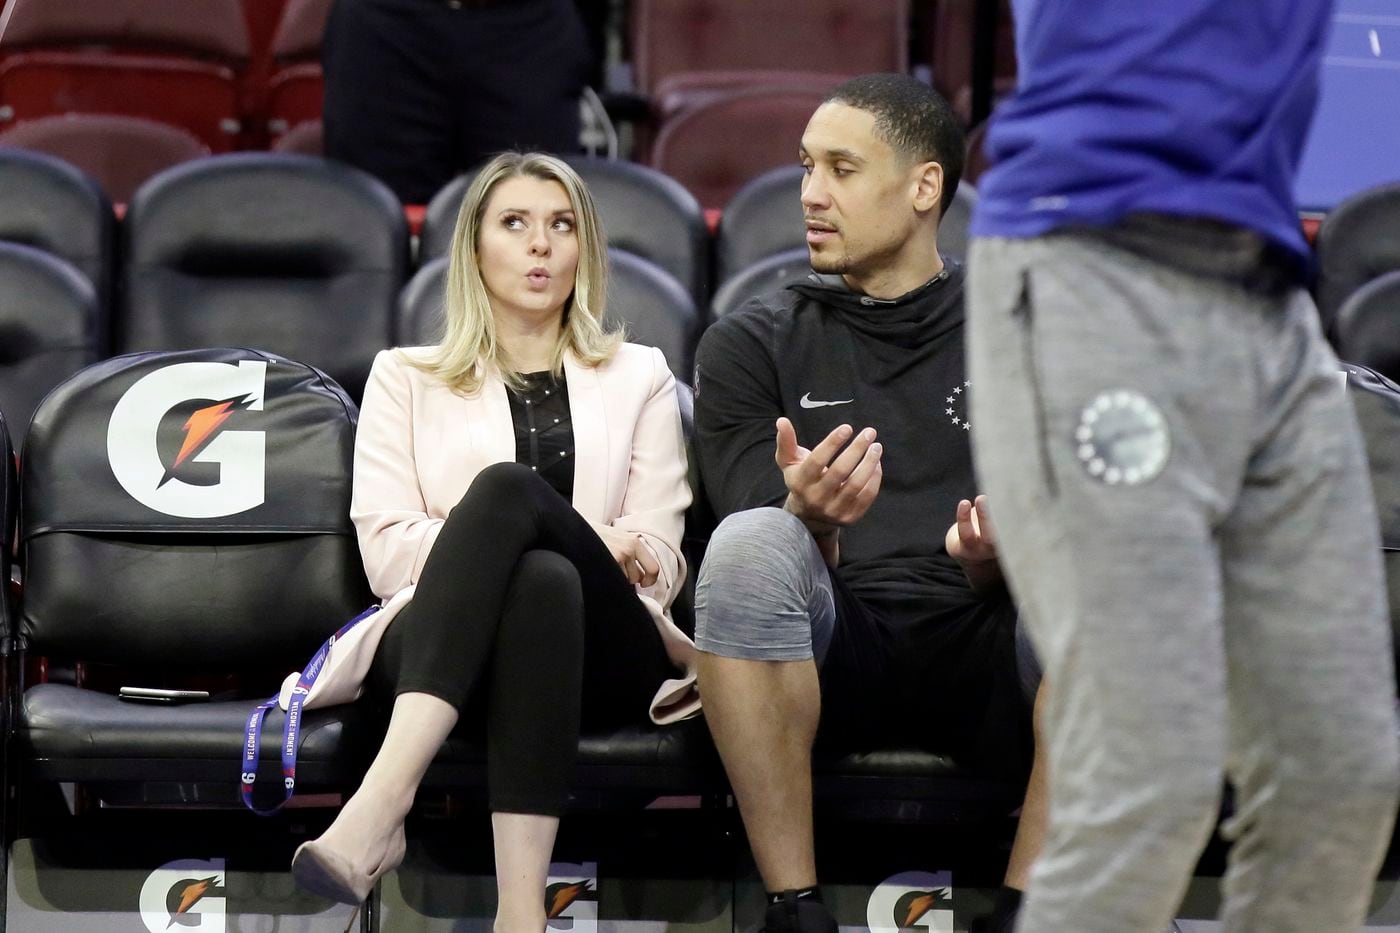 Annelie Schmittel travels with the team. She's always at practice and courtside during games. She joined the Sixers earlier this year from the NFL.